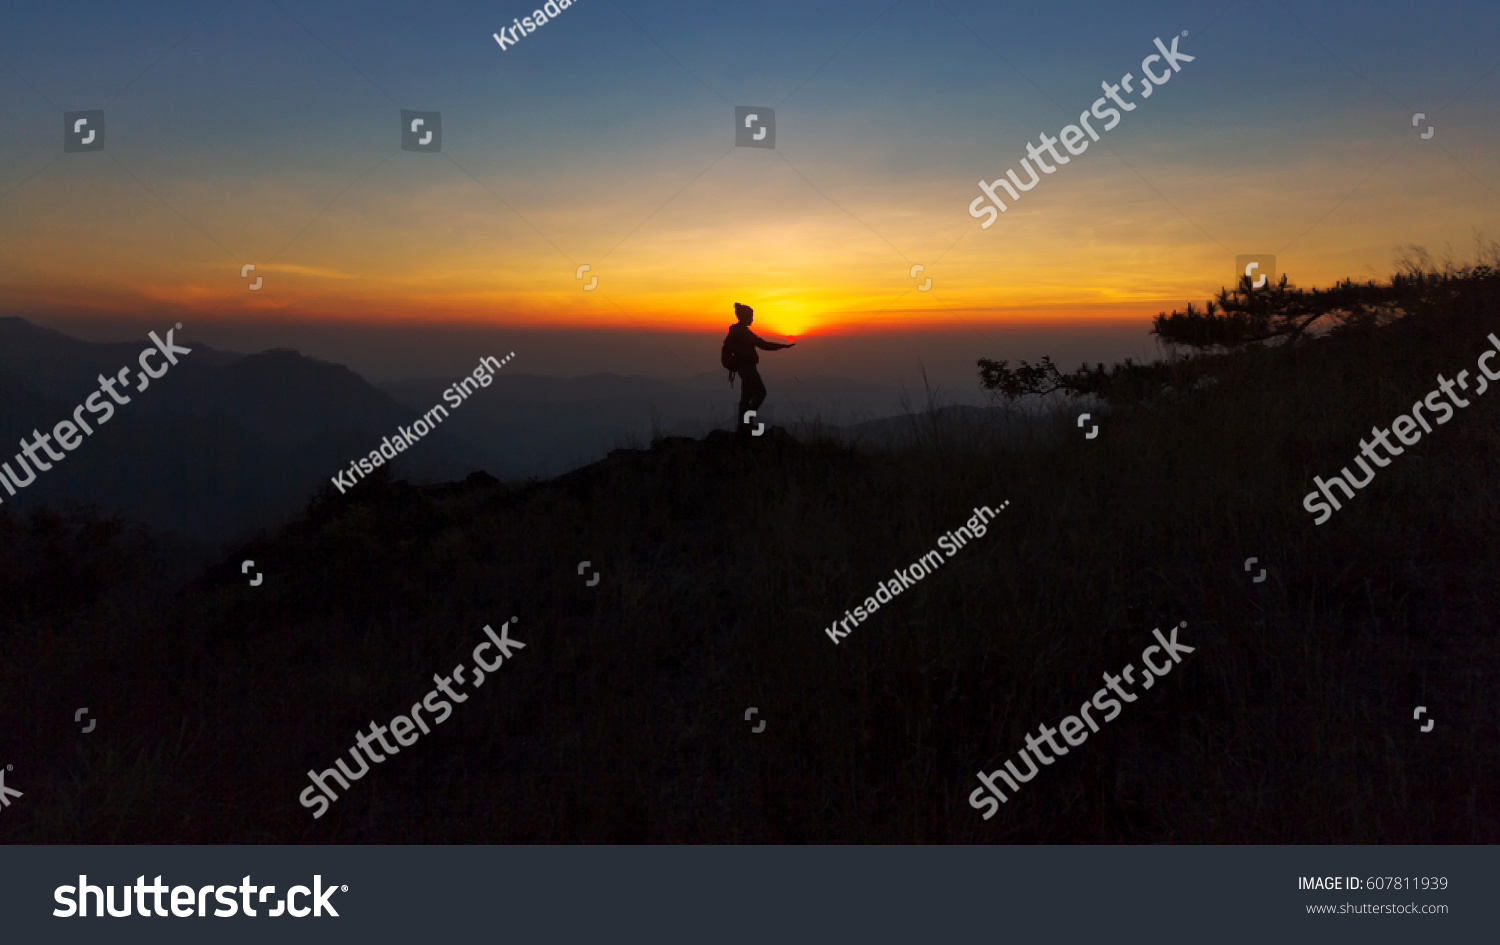 Edit Photos Free Online Time  for sunset  Shutterstock 